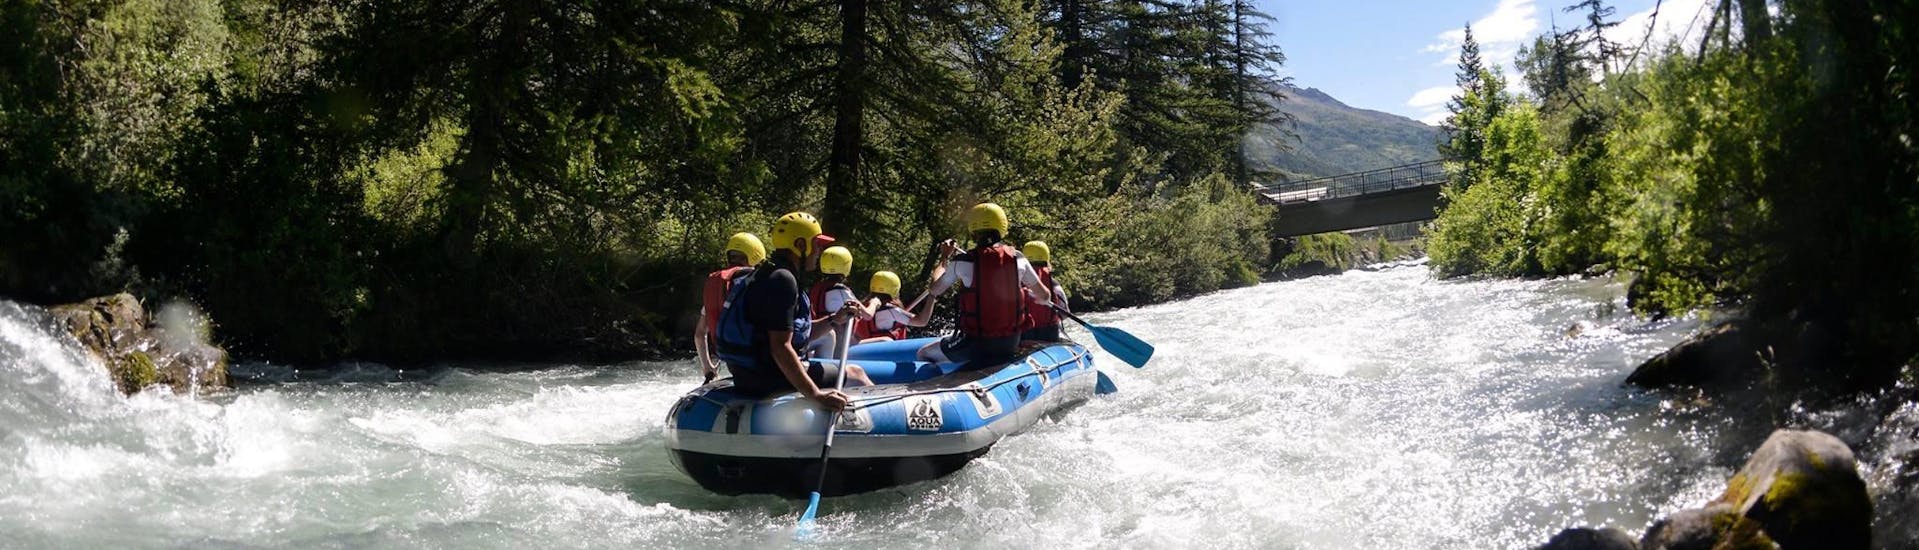 A group of friends is doing a rafting tour near Serre Chevalier thanks to Rivières Evasion.